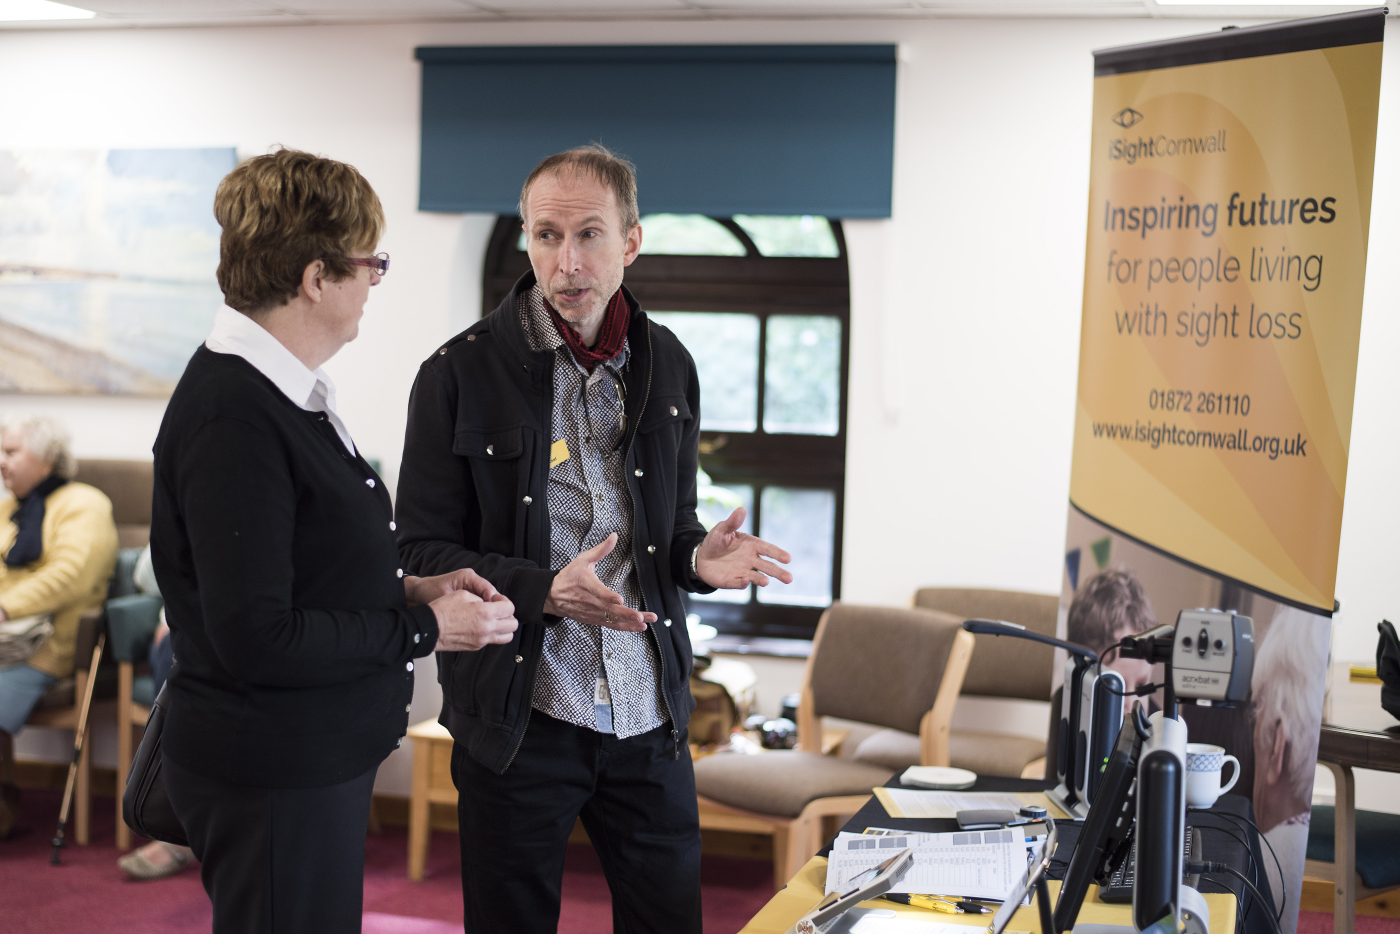 iSightCornwall Assistive Technology Officer, Rodney Keats speak with a client at a sight loss awareness event.